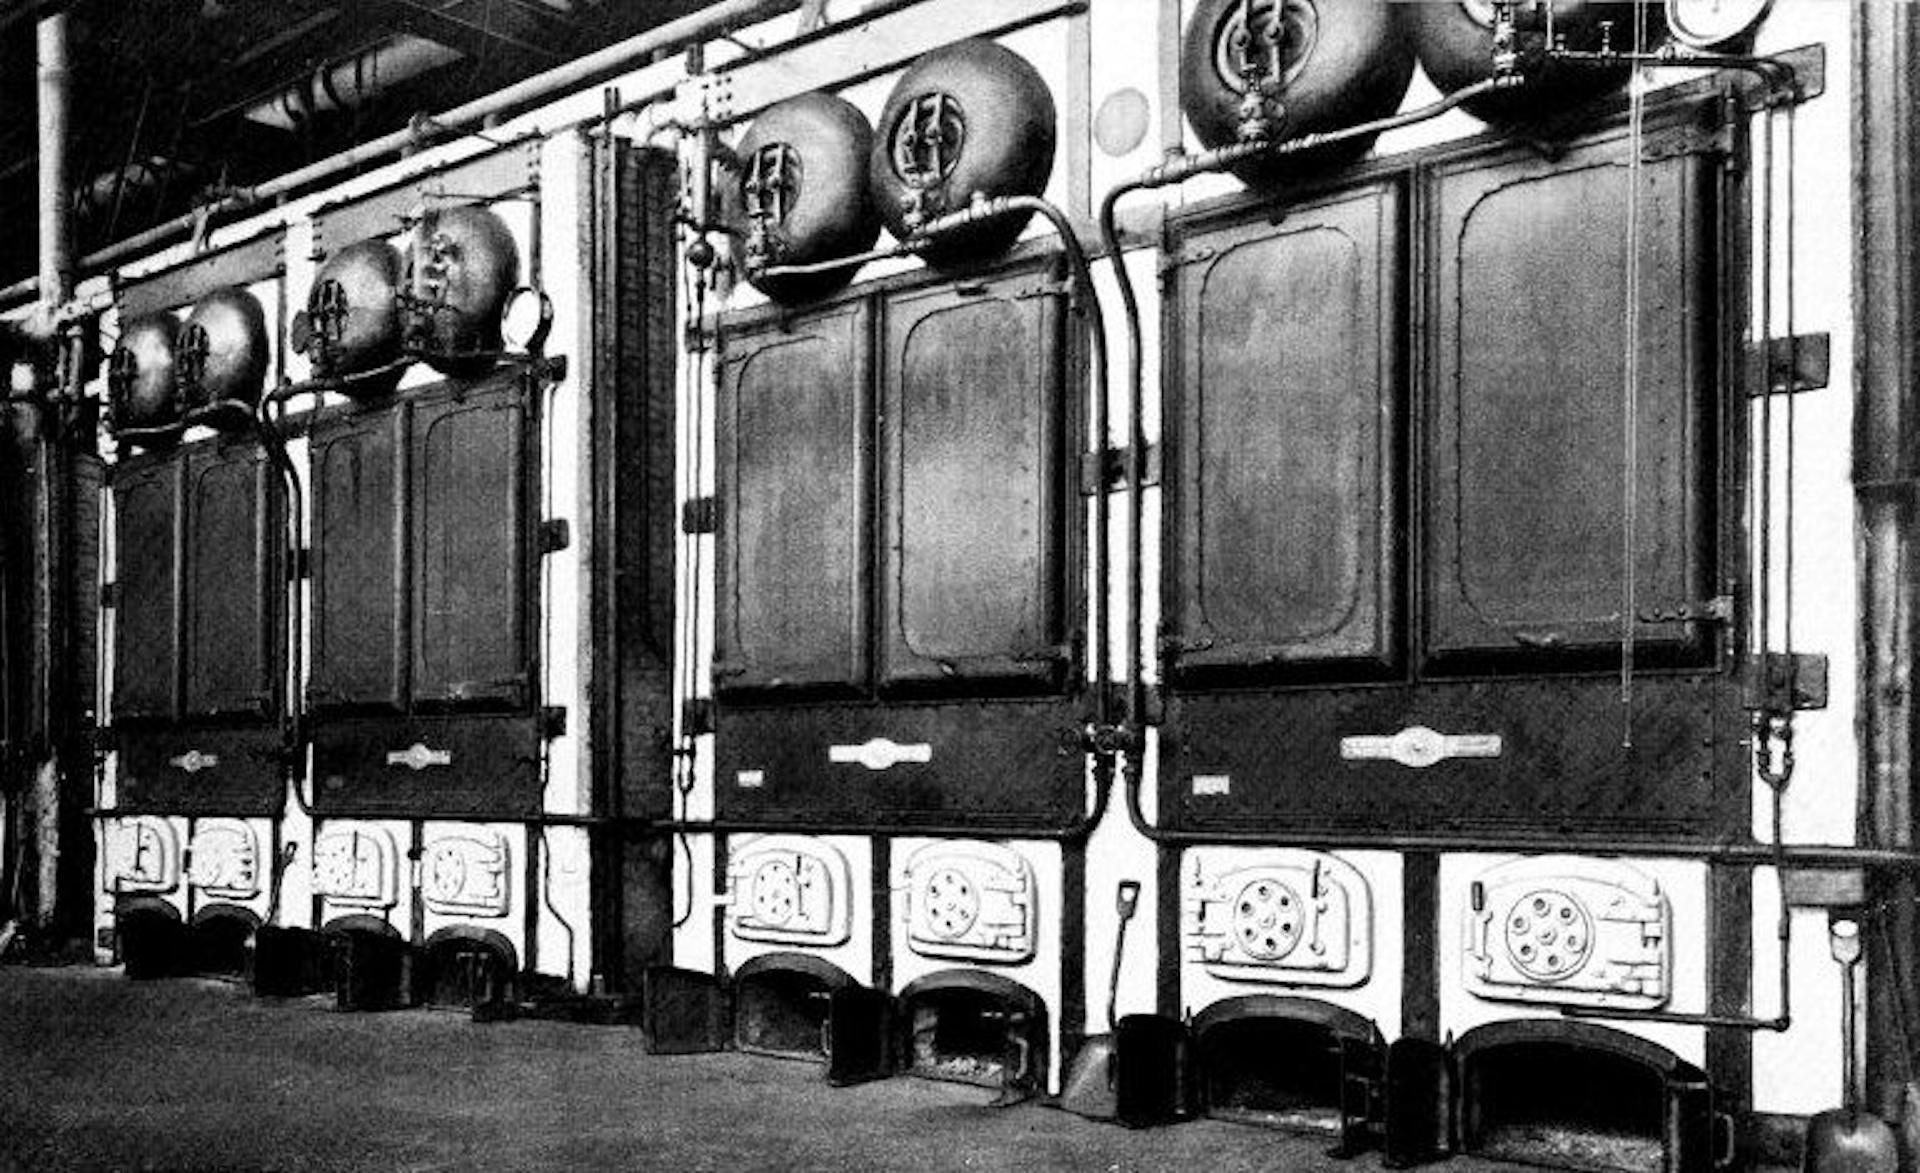 Partial View of 7000 Horse-power Installation of Babcock & Wilcox Boilers at the Philadelphia, Pa., Plant of the Baldwin Locomotive Works. This Company Operates in its Various Plants a Total of 9280 Horse Power of Babcock & Wilcox Boilers